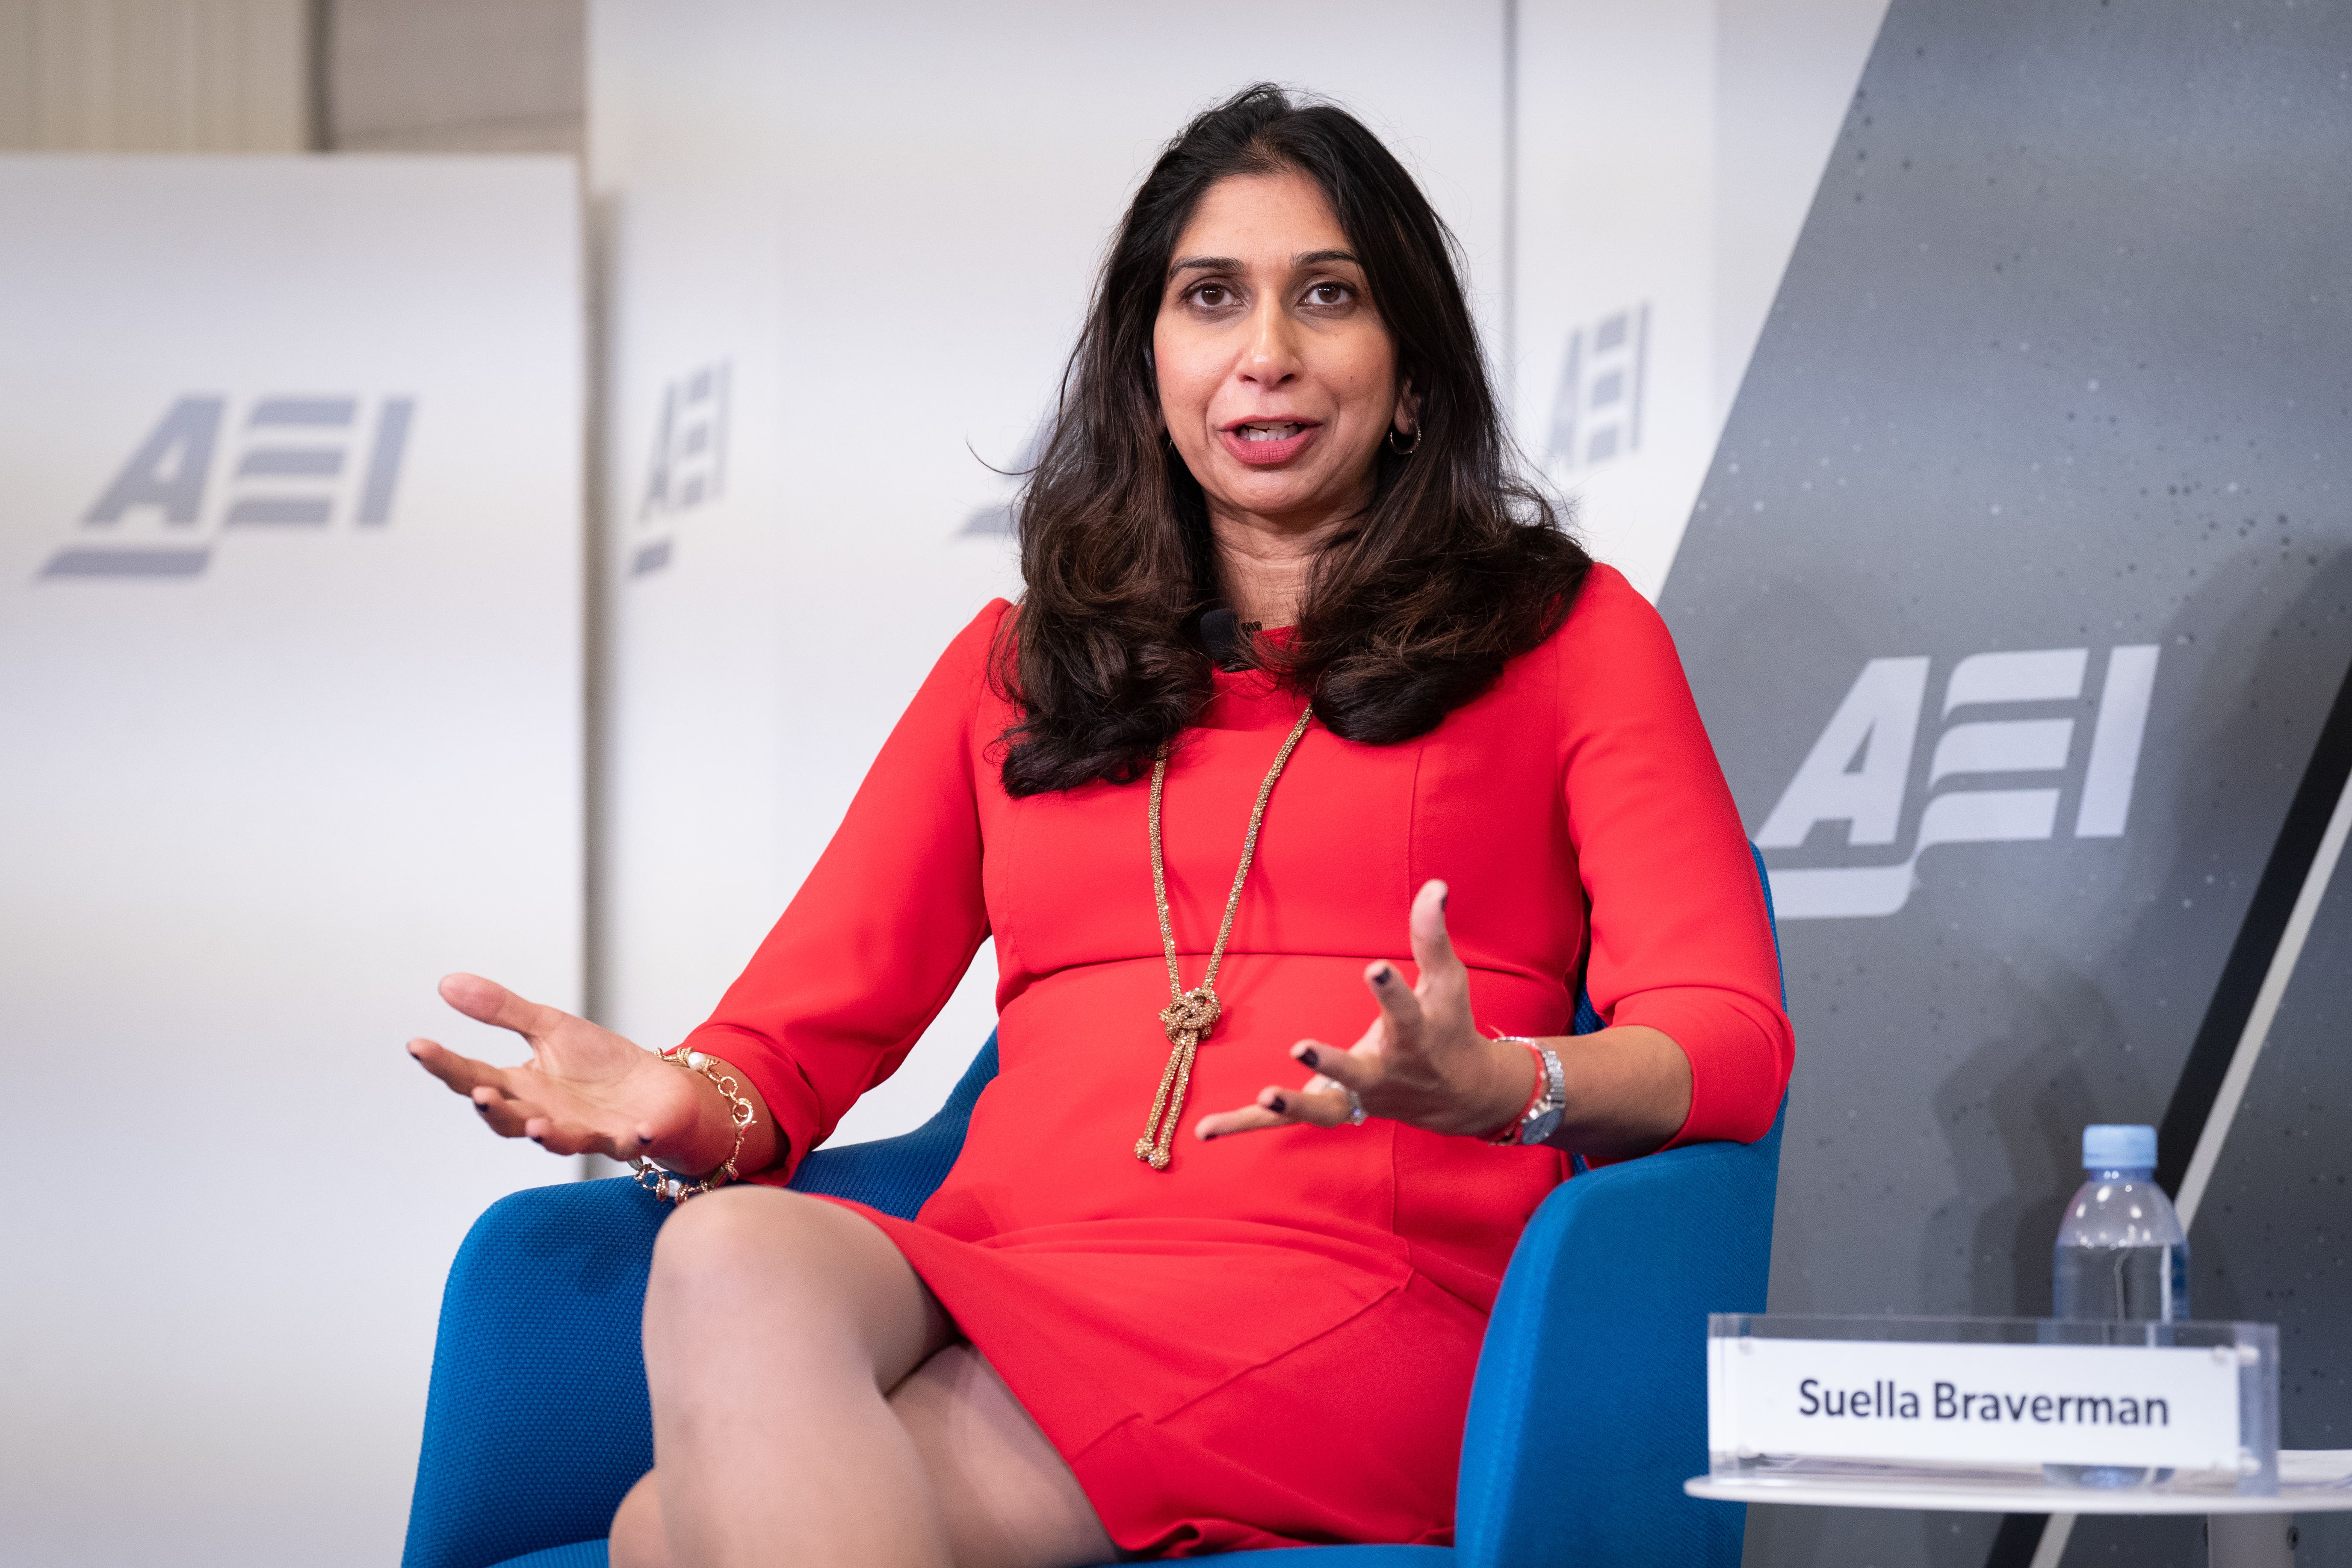 Suella Braverman posed legitimate questions about definitions of migrants and refugees